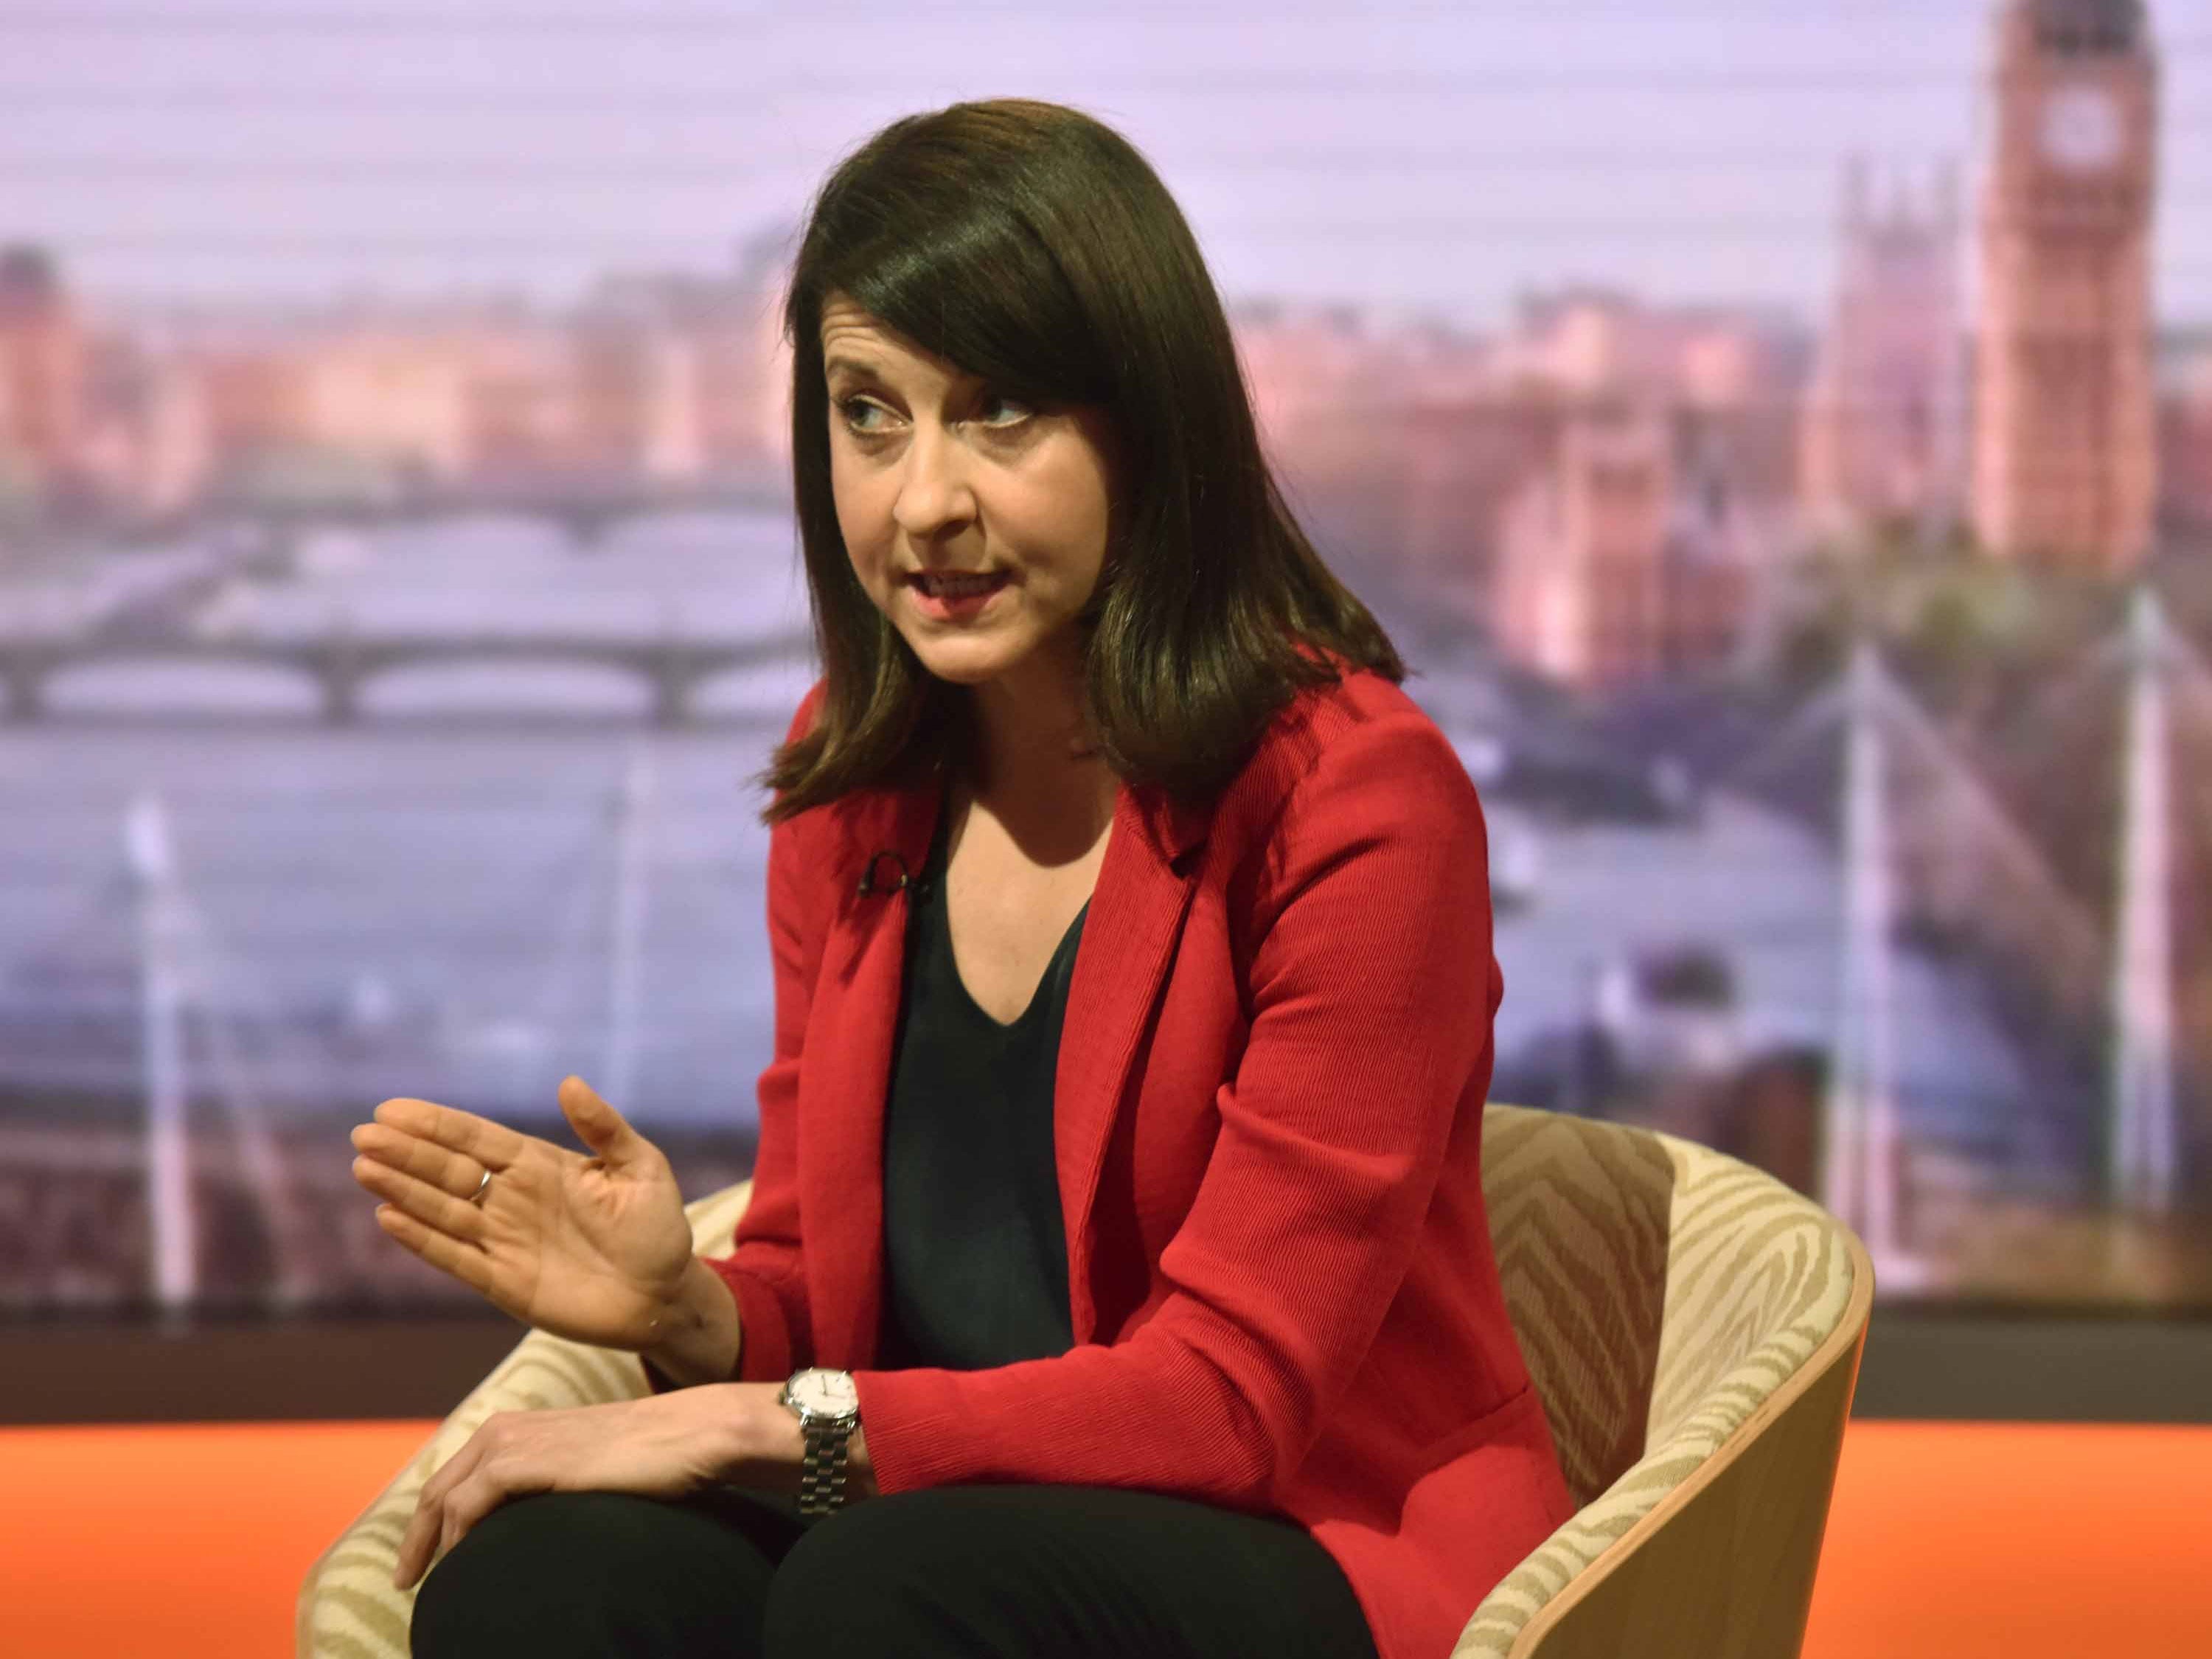 Labour leadership hopeful Liz Kendall appears on the BBC's The Andrew Marr Show